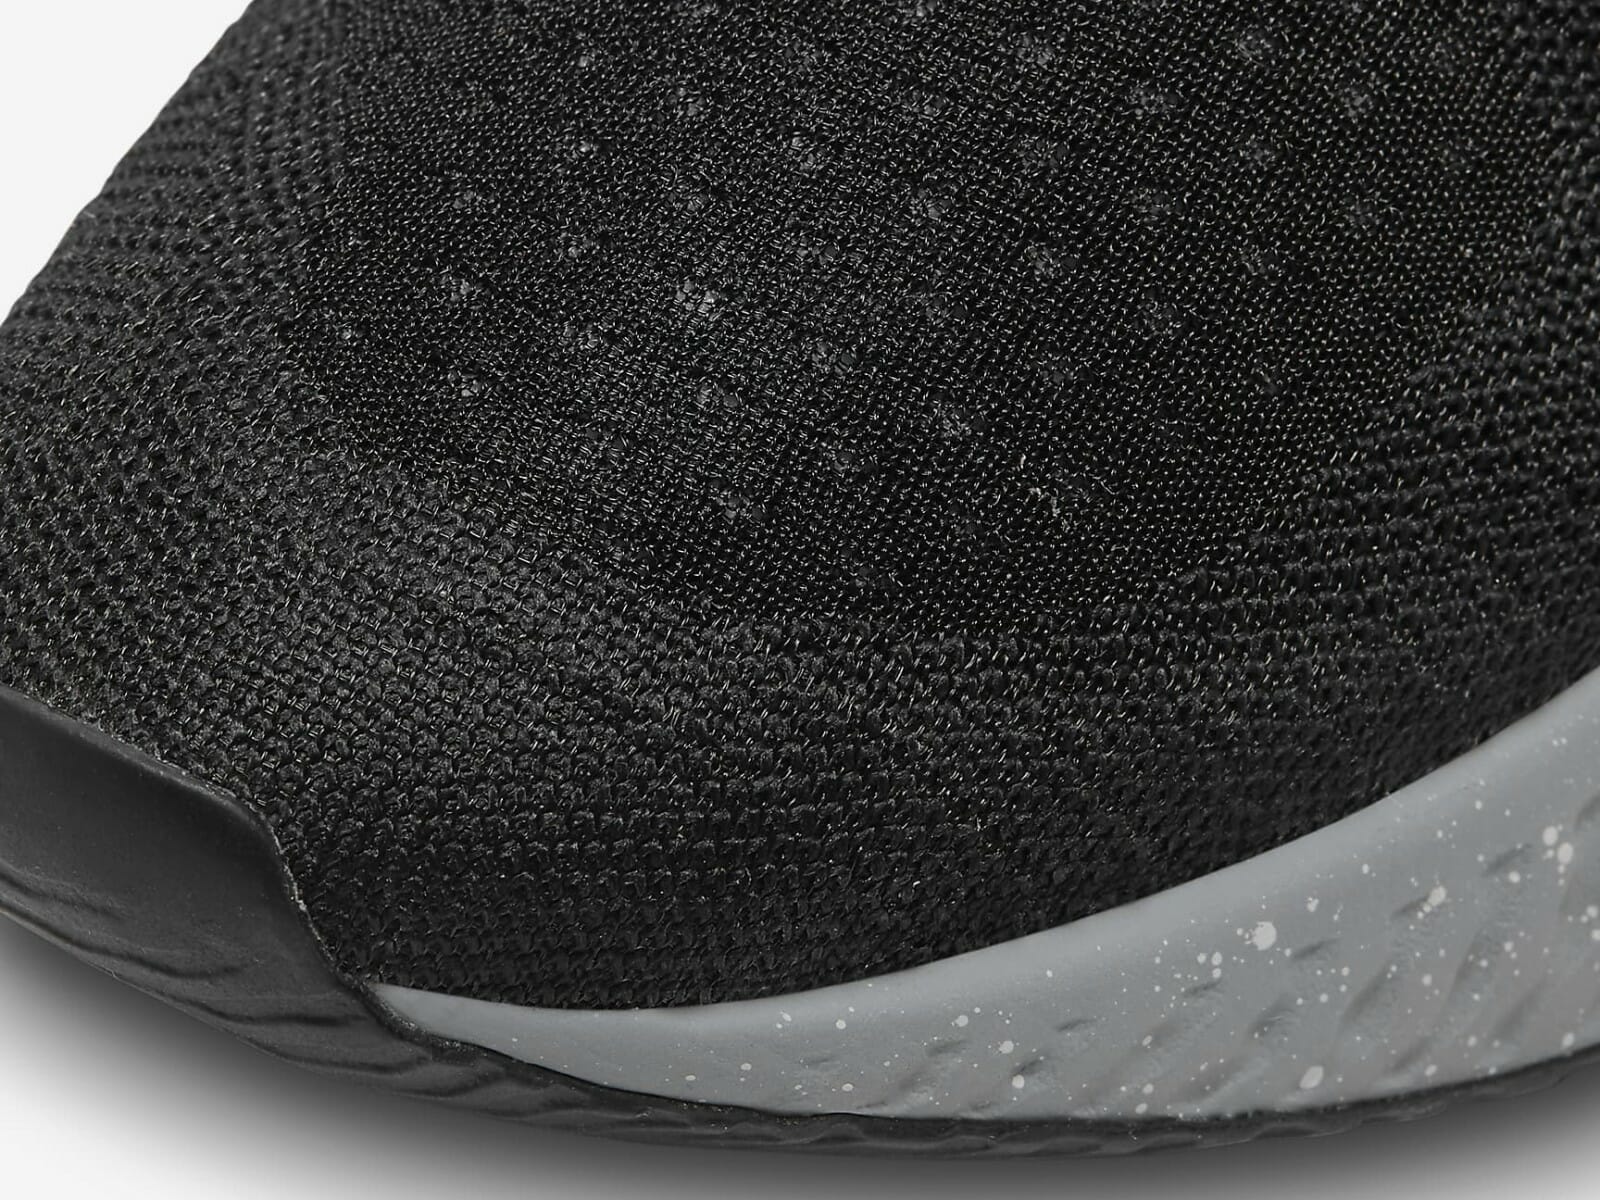 Detailed view of the flyknit mesh upper.